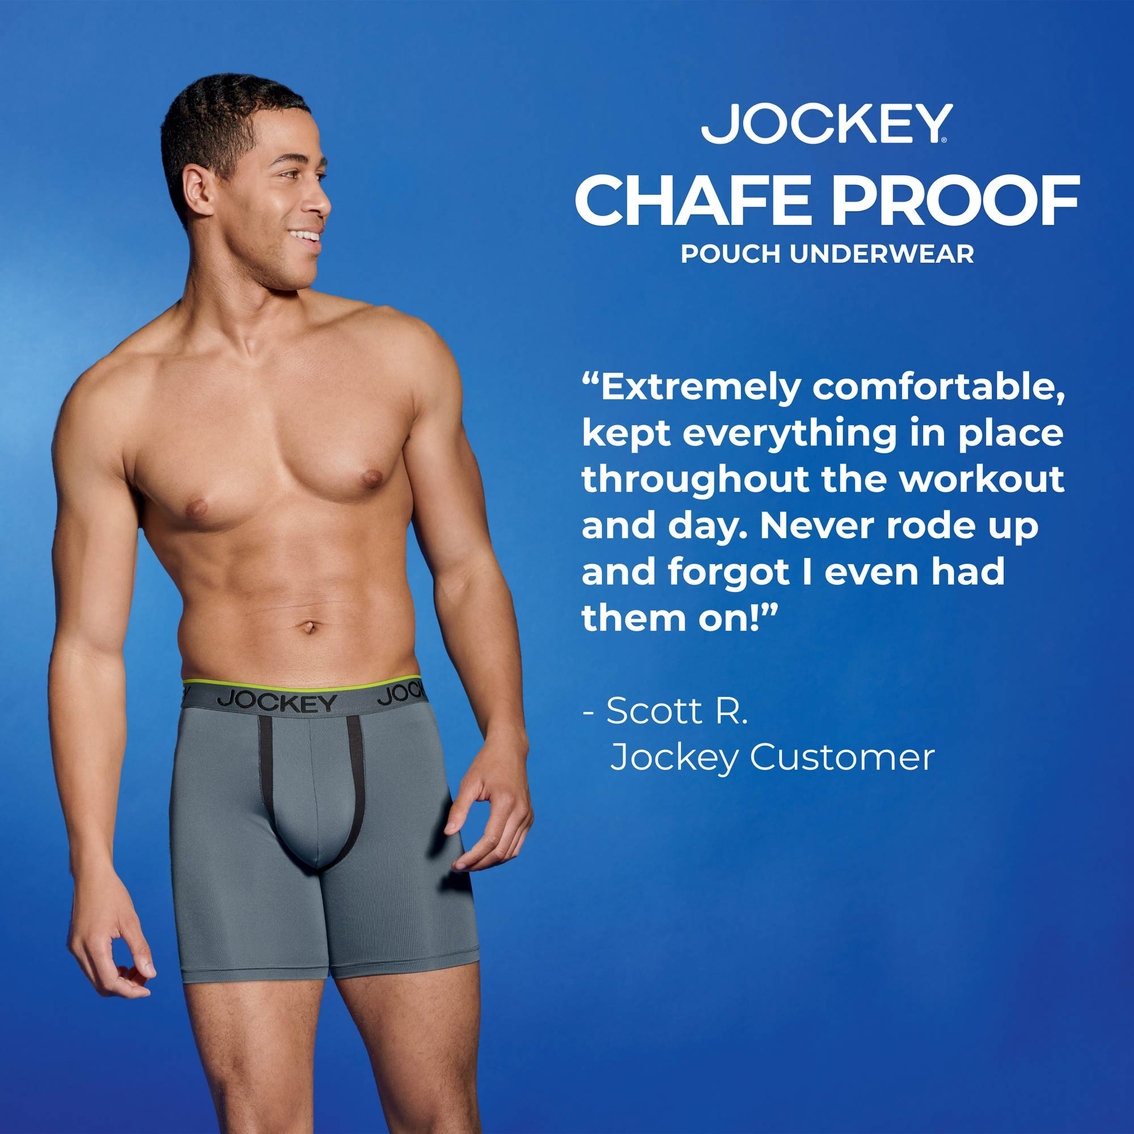 Jockey Chafe Proof Cotton Boxer Briefs - Image 6 of 7